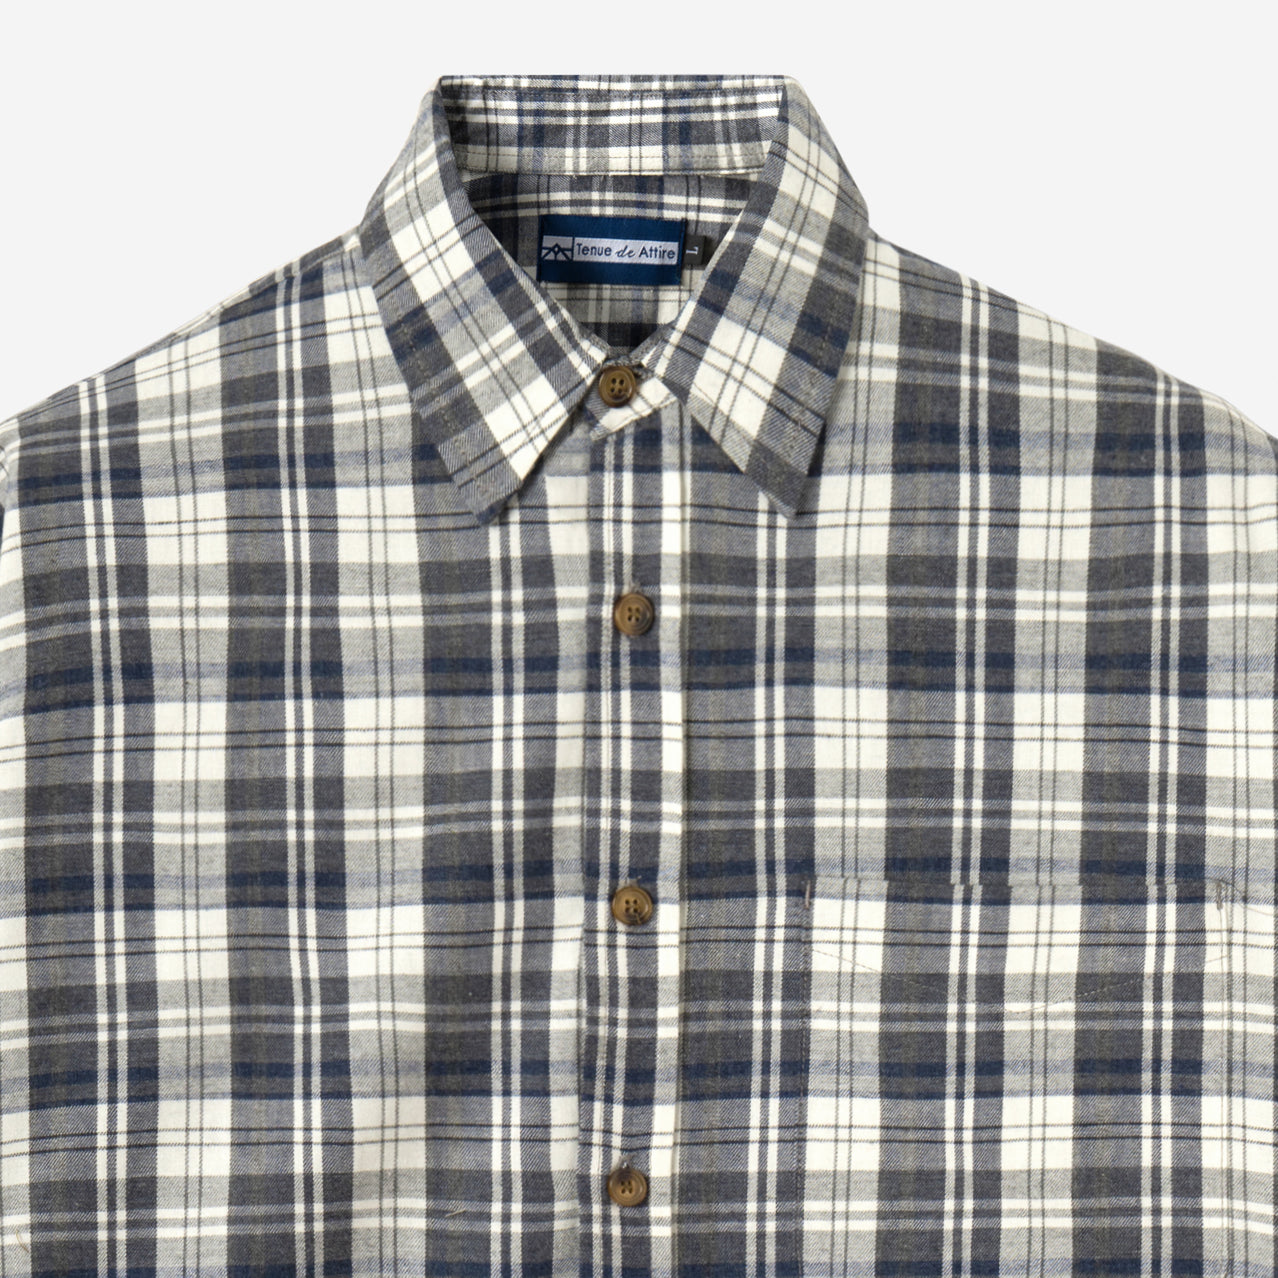 Day to Day Flannel - Navy White